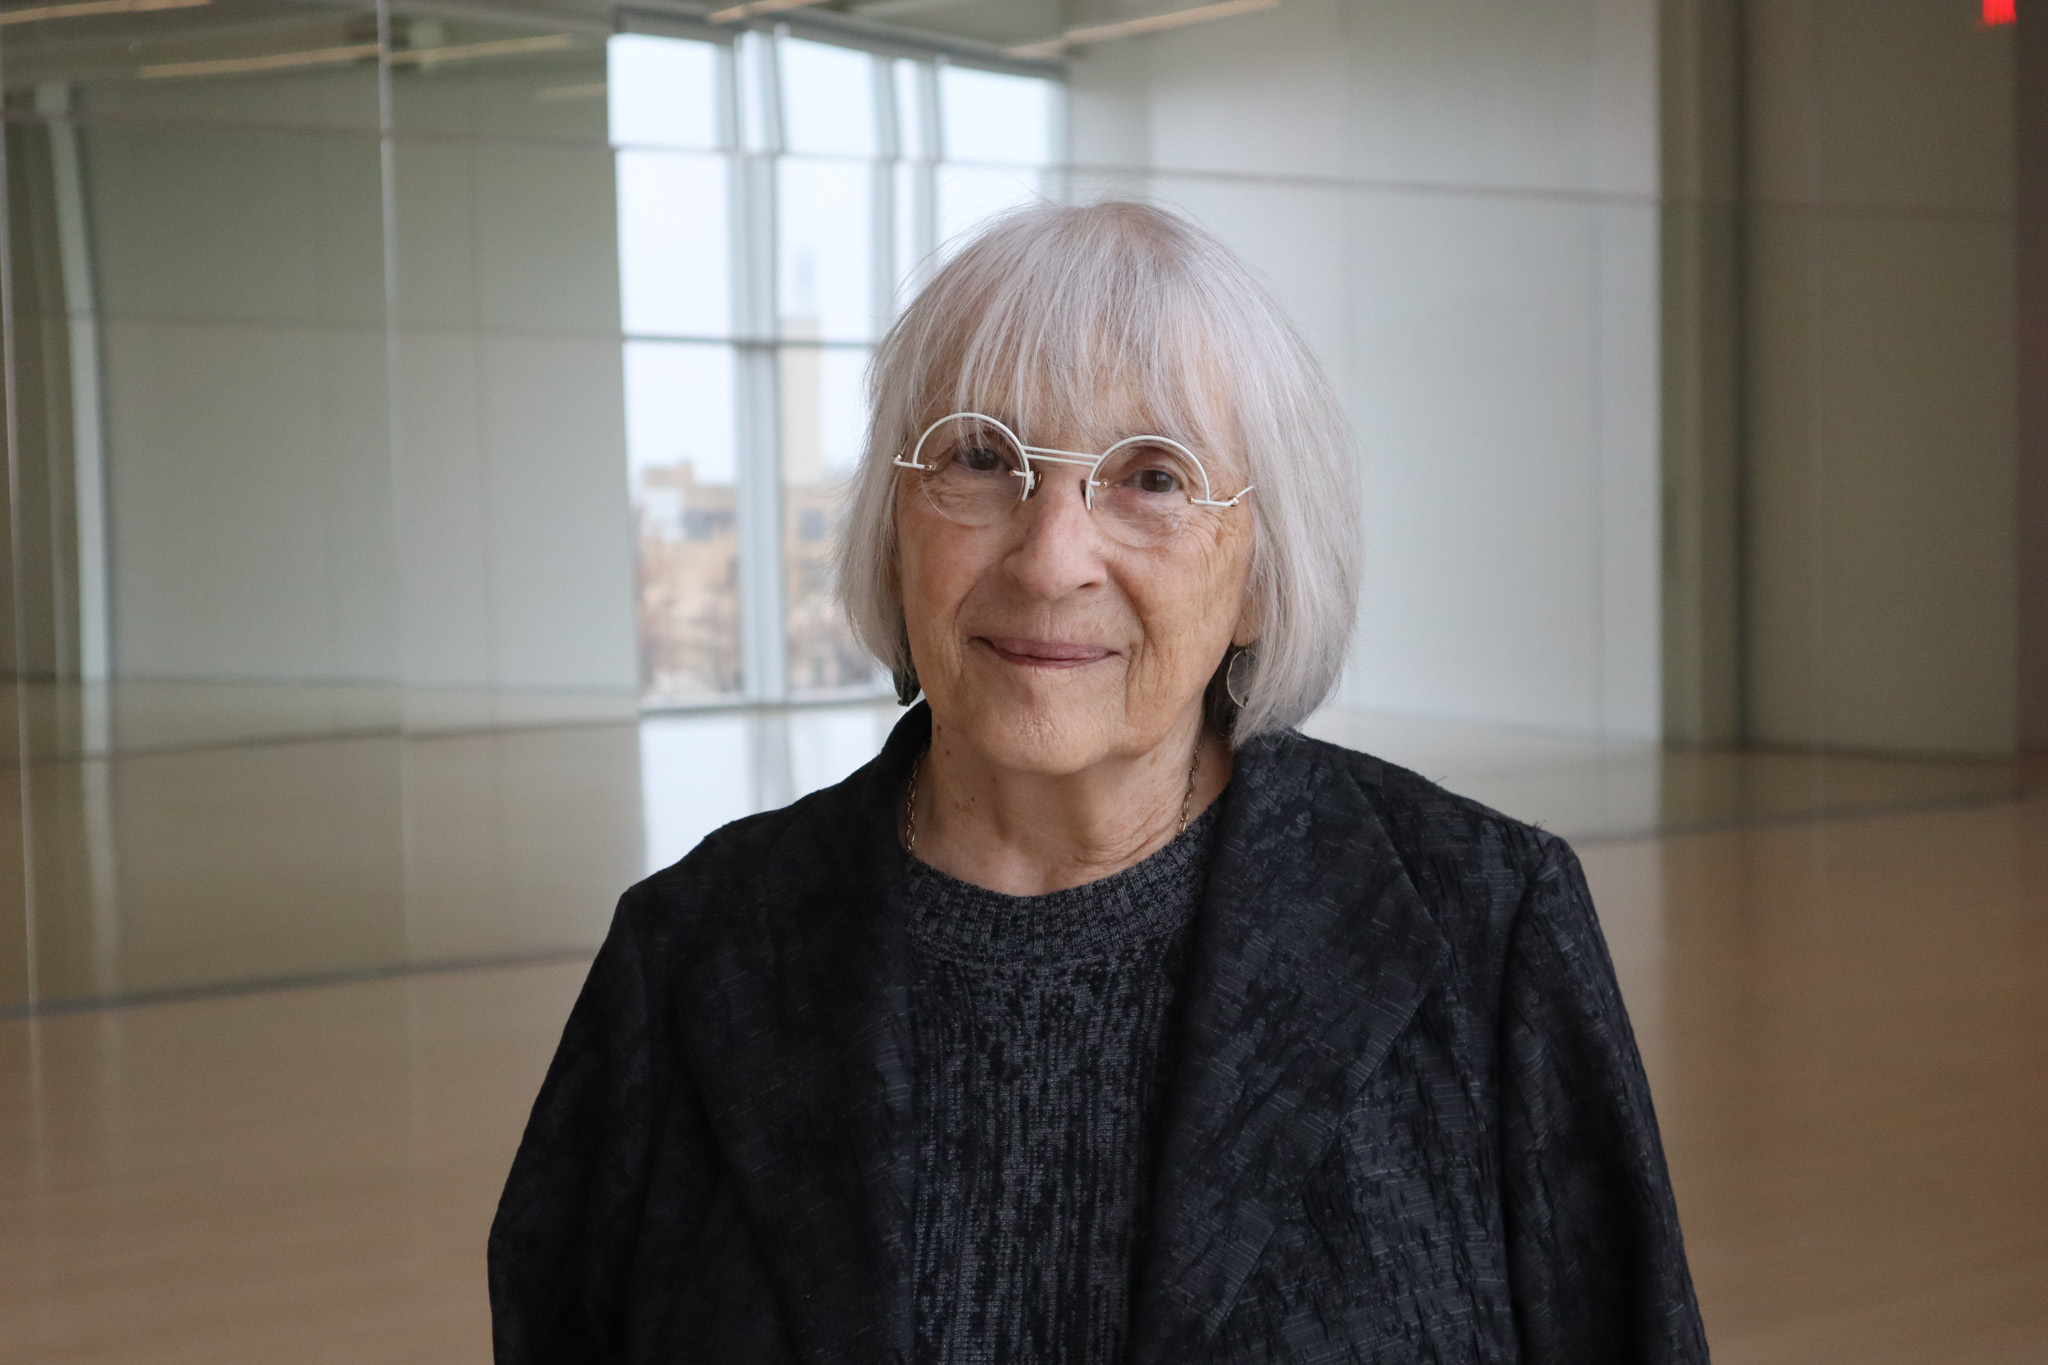 An older white woman with short white hair, white circular glasses, dressed in dark gray smiles softly, standing in a room with mirrors.